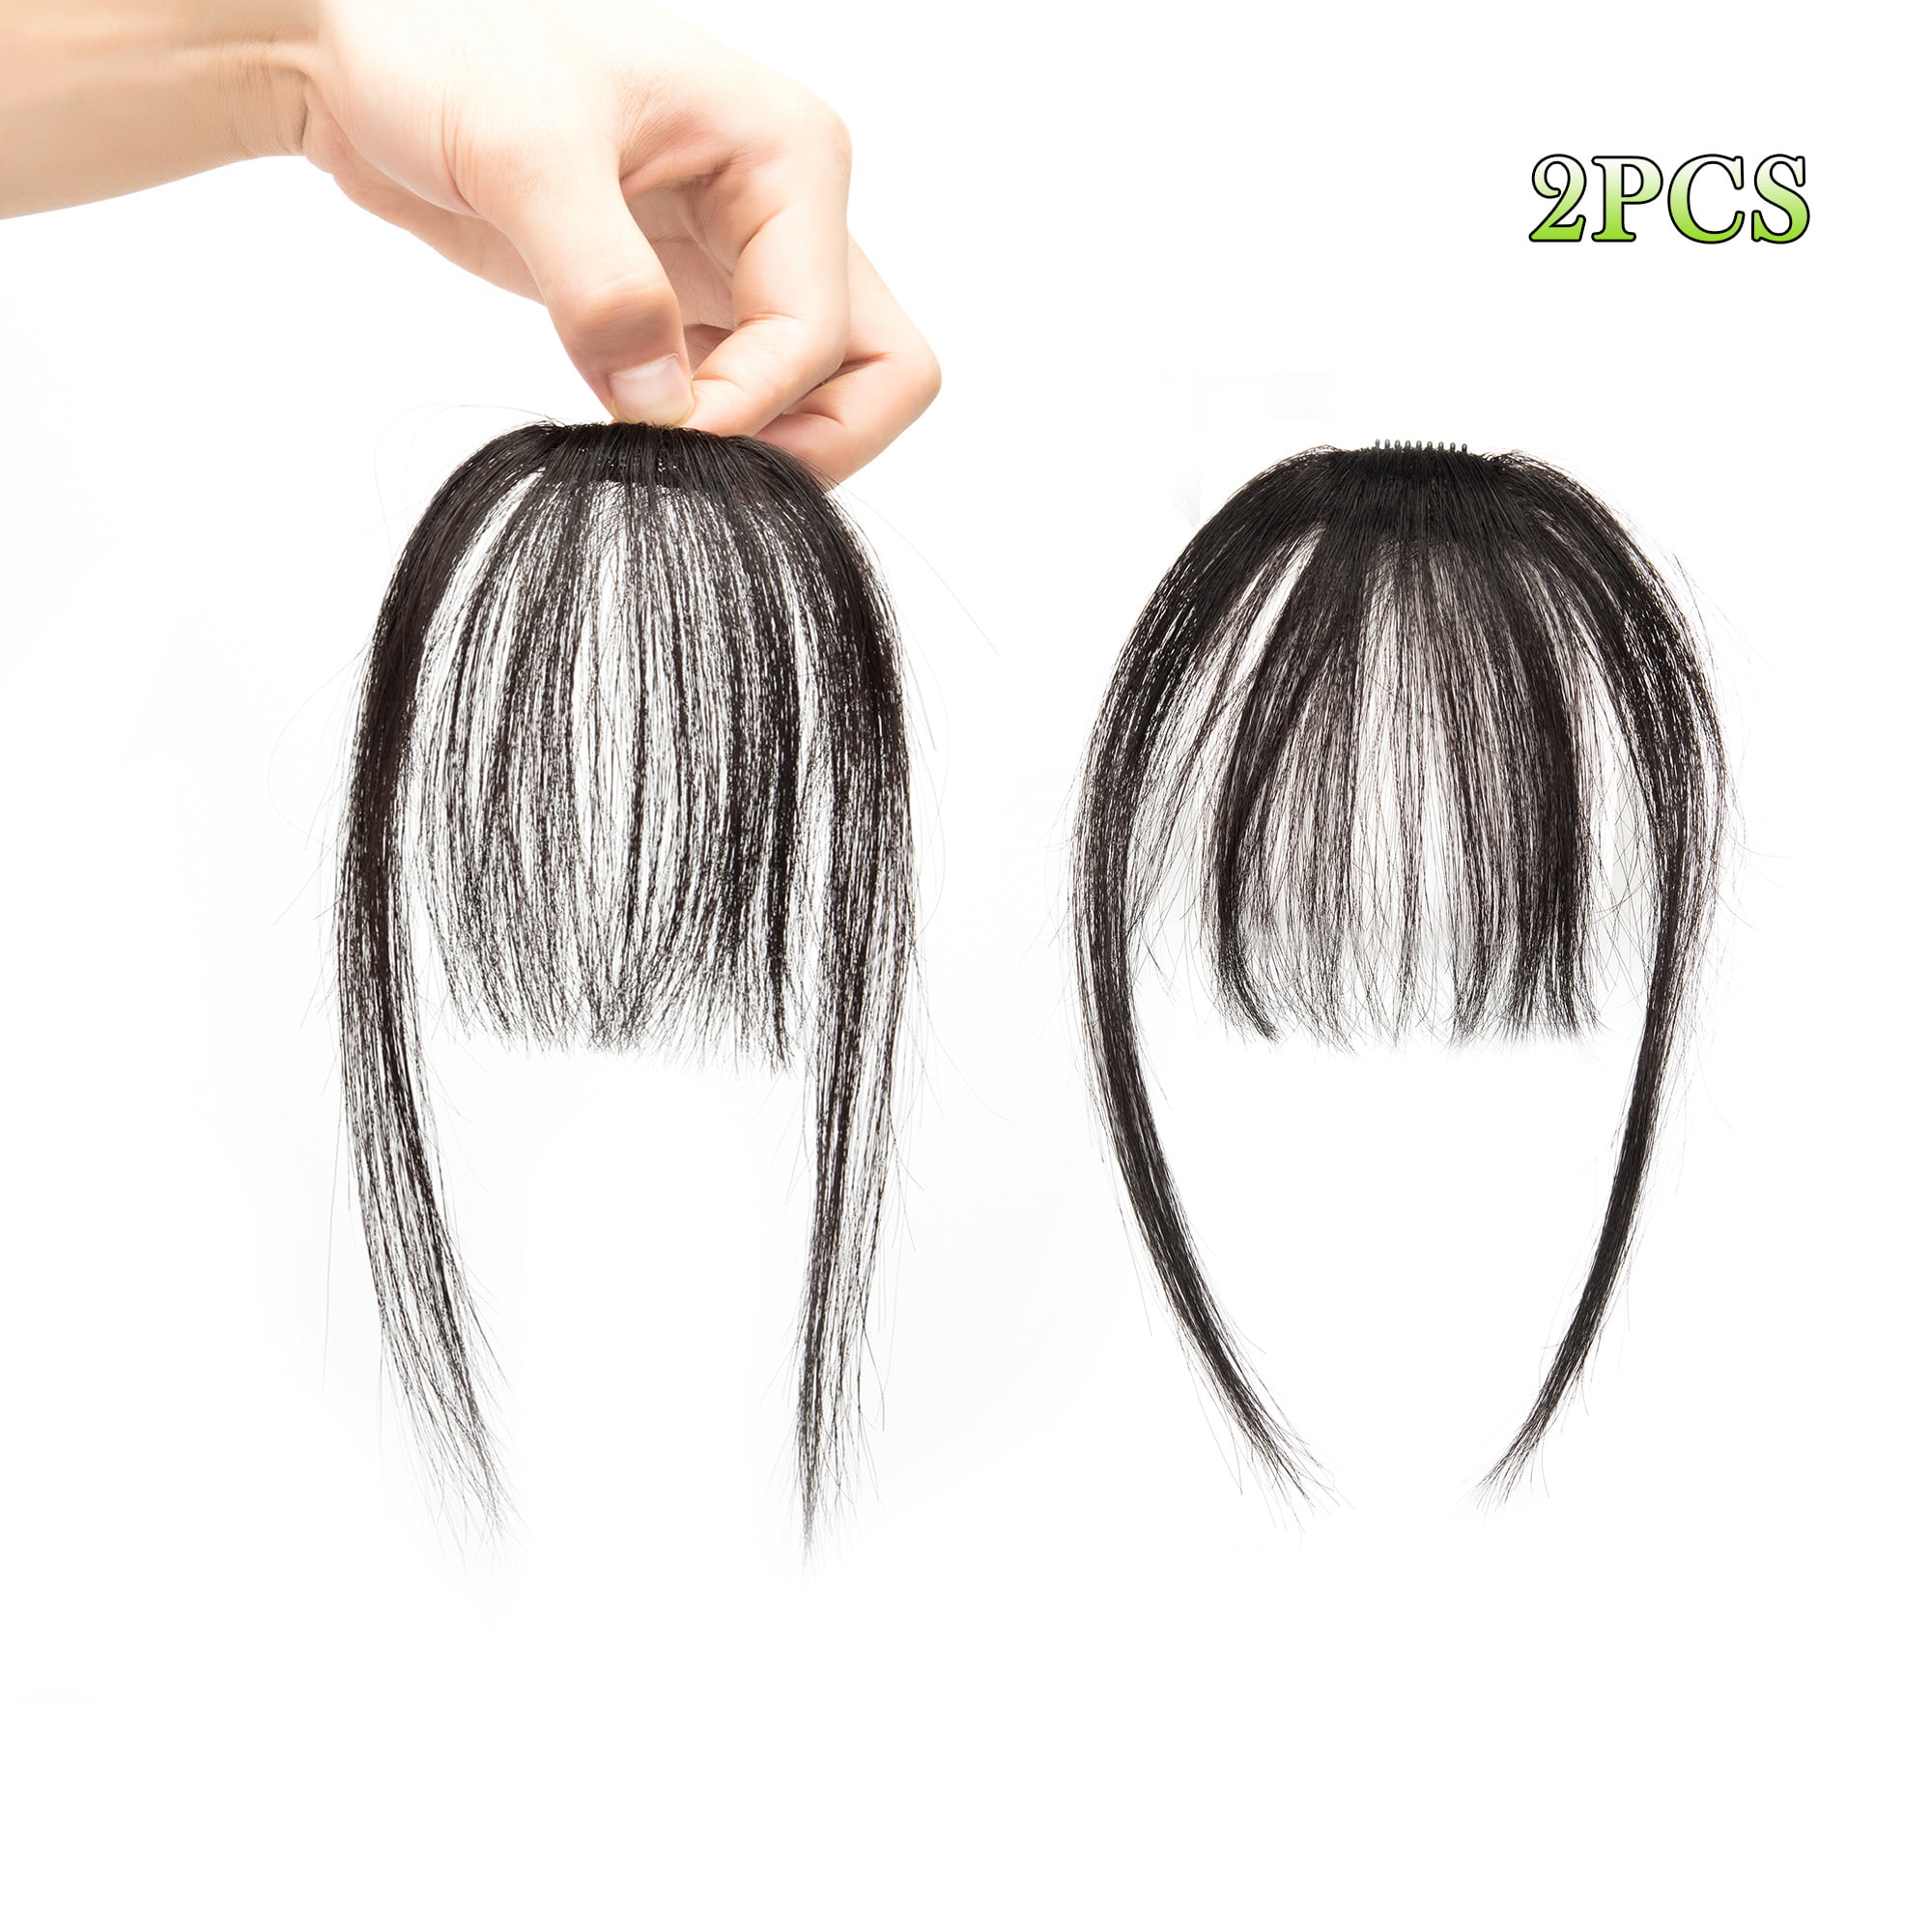 2pcs Long Doll Wig Practical Durable Helpful Fake Hair Accessory for Man Adult